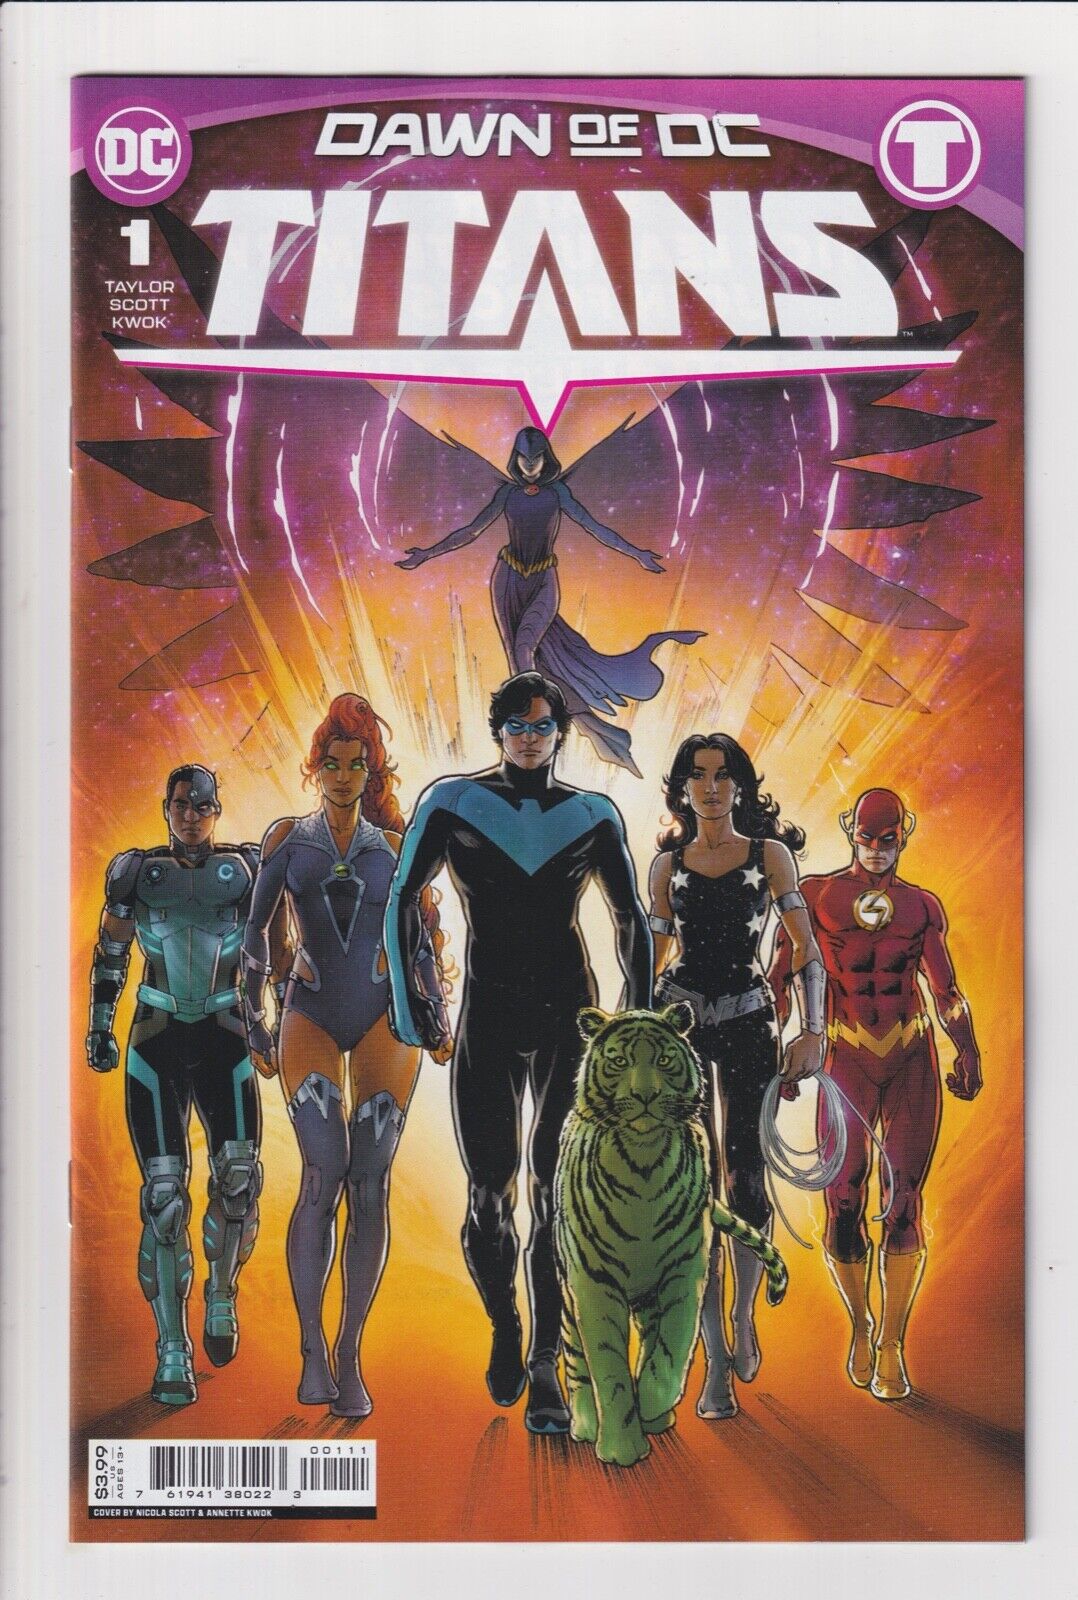 TITANS 1 2 3 4 5 6 7 8 9 or 10 NM 2023 Taylor DC comics sold SEPARATELY you PICK